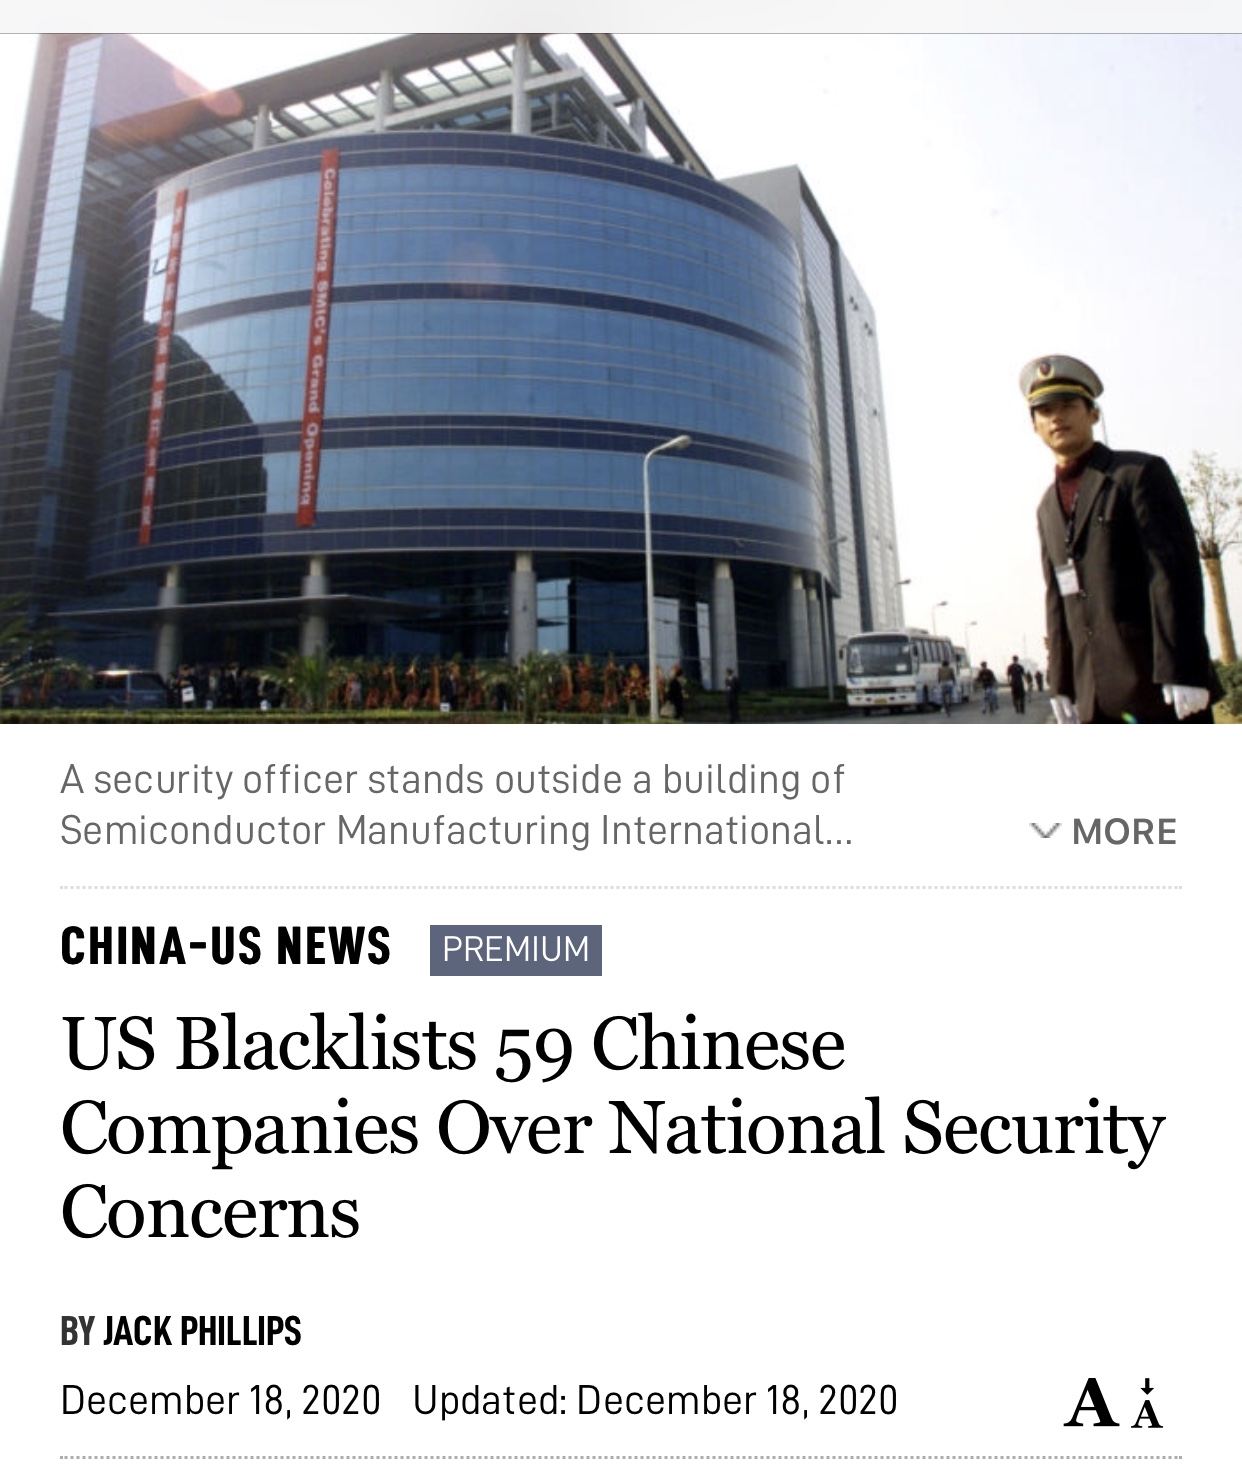 US Blacklists 59 Chinese Companies Over National Security Concerns